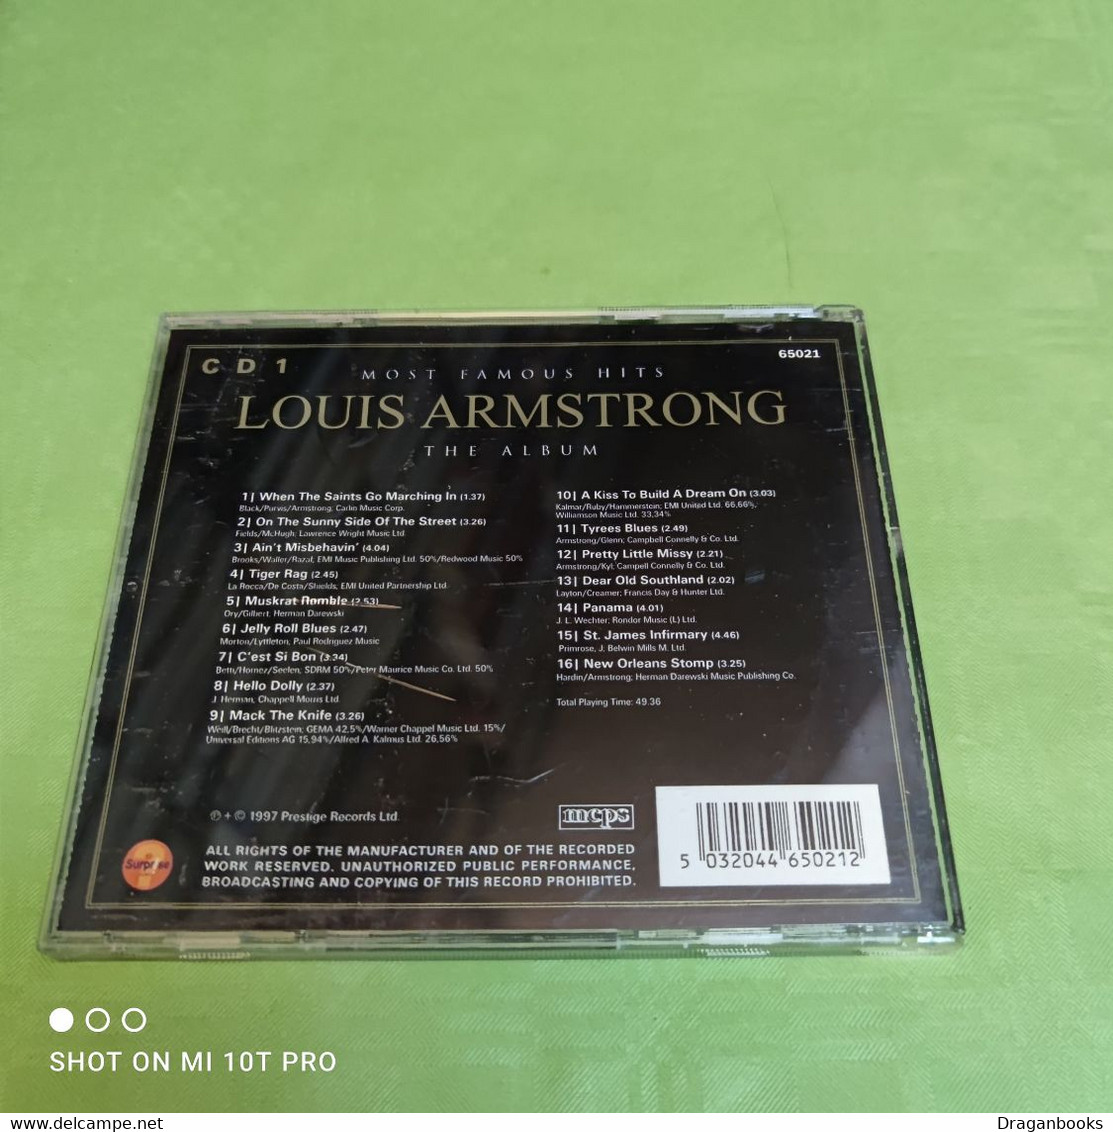 Louis Armstrong - The Album CD 1 - Blues